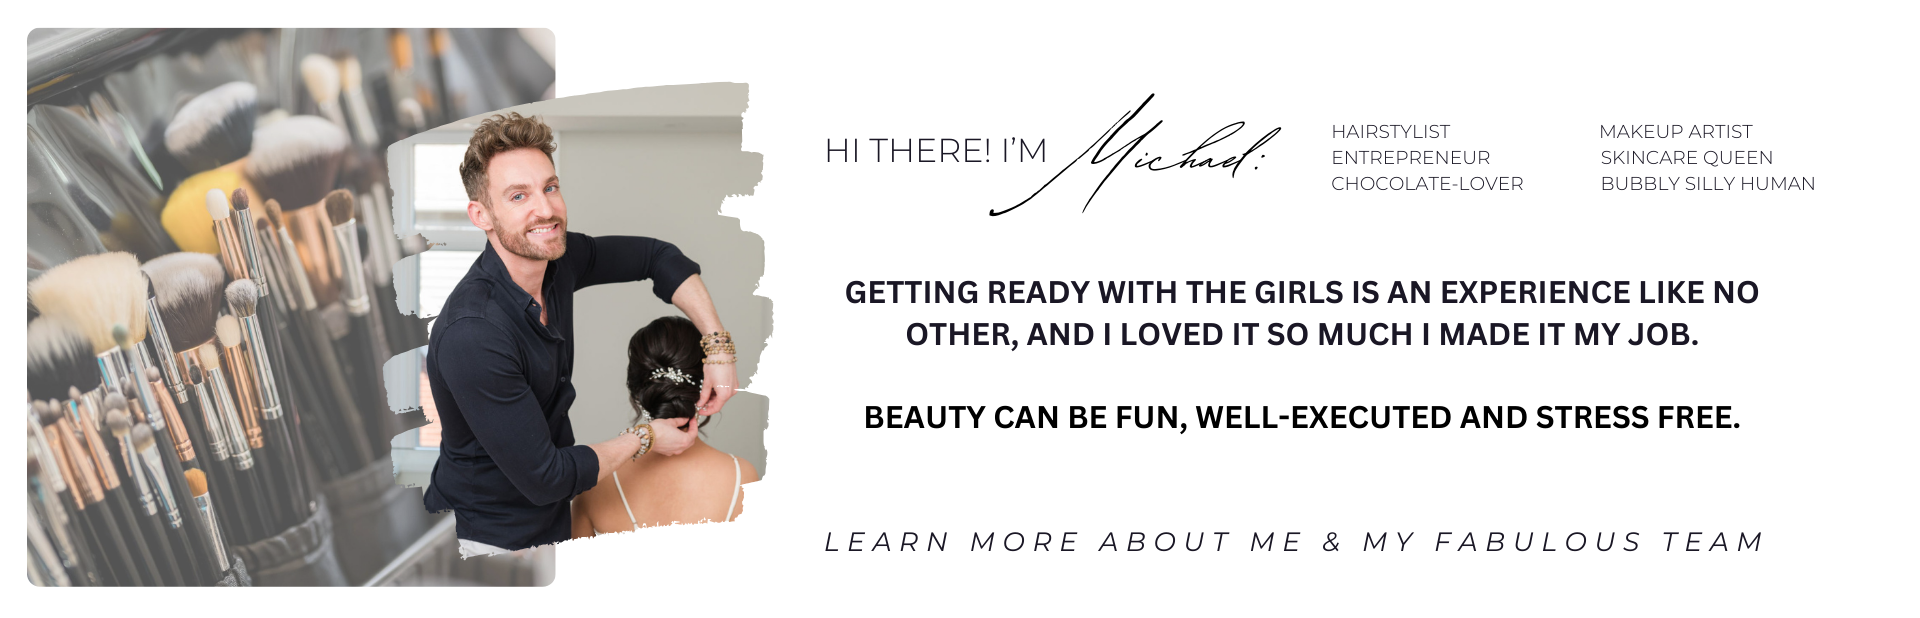 About - Hair and Makeup Services Toronto by Michael Fels Beauty